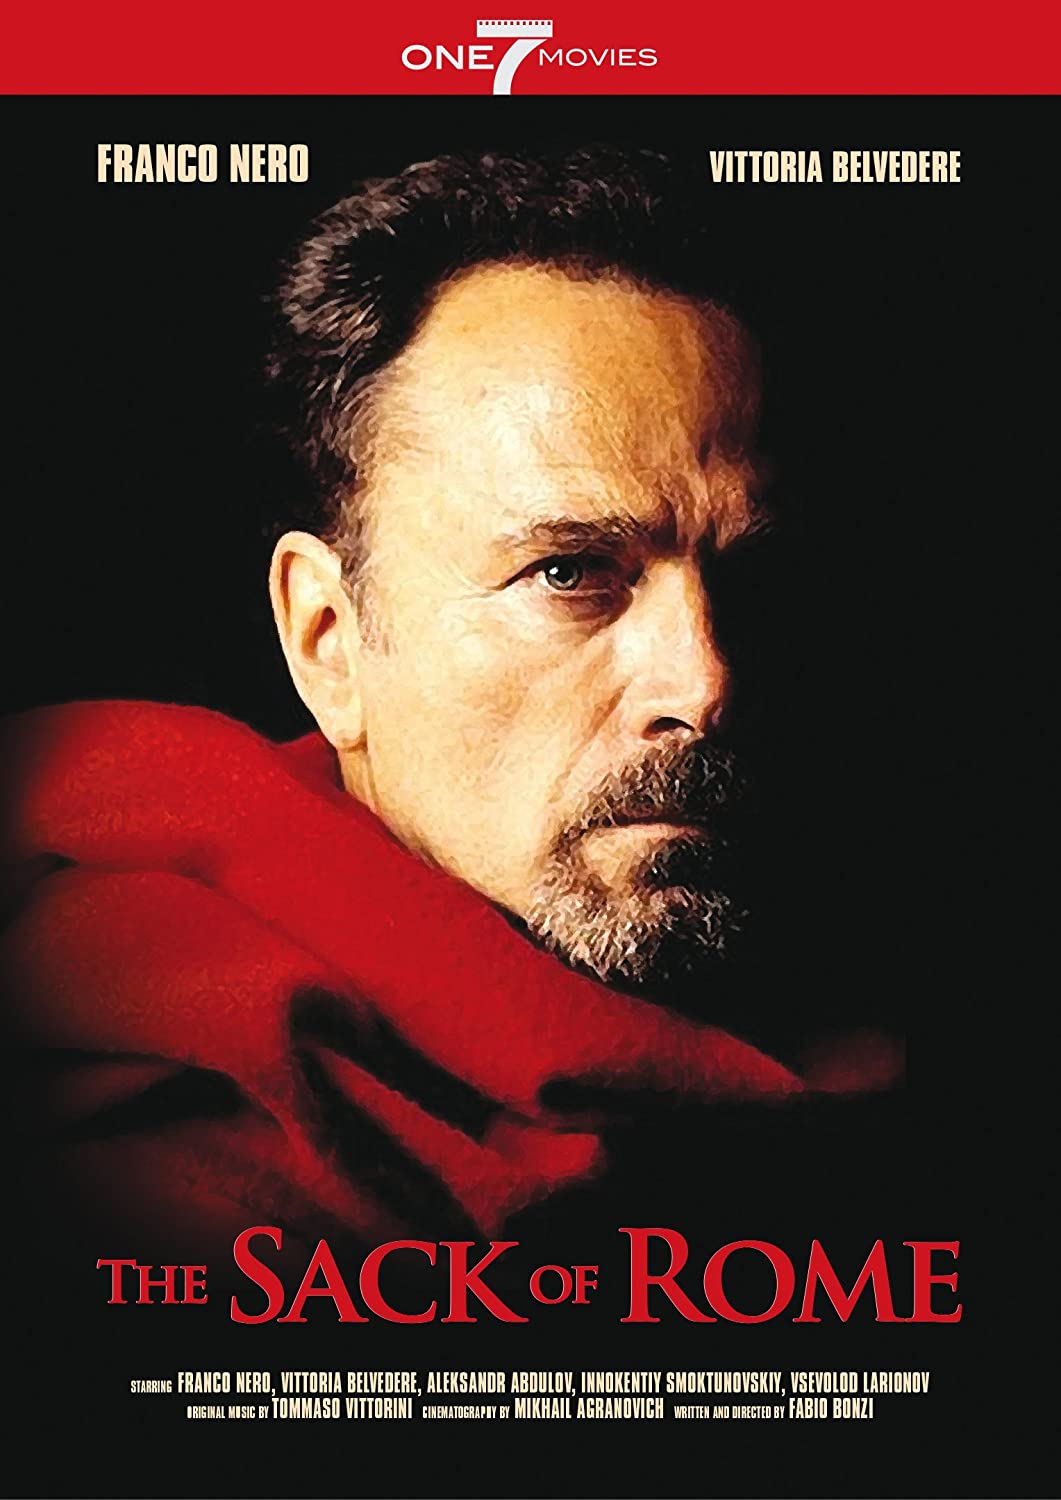 THE SACK OF ROME DVD